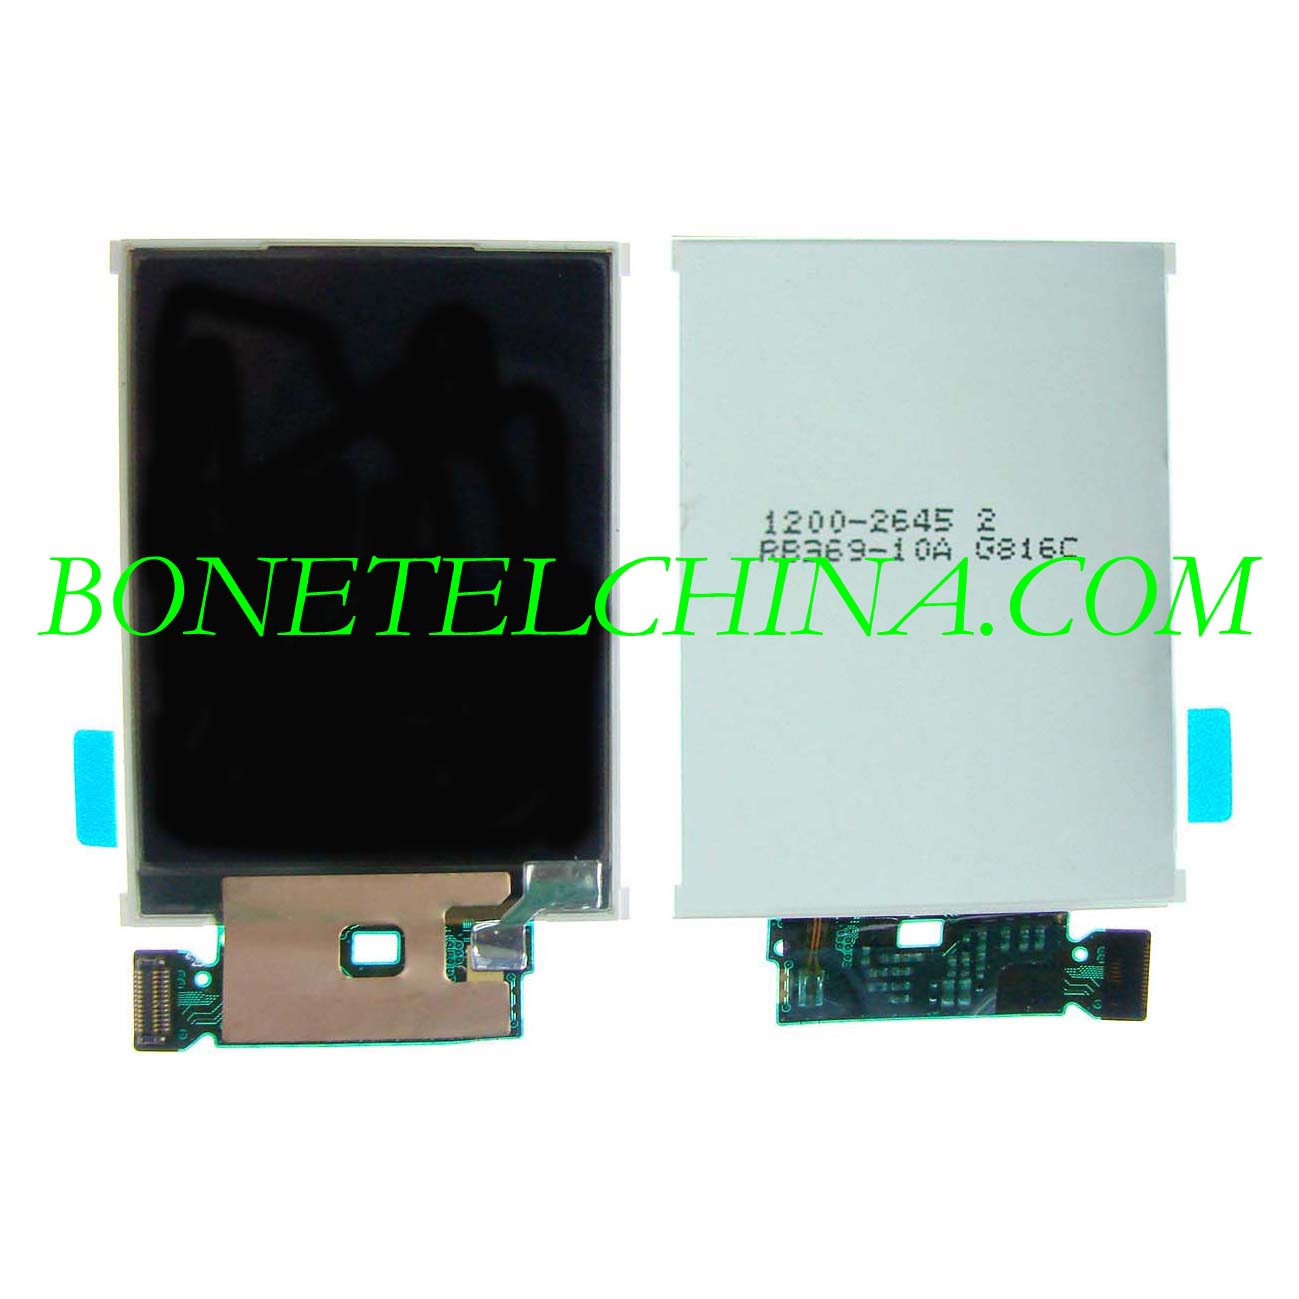 W910 LCD for Sony Ericsson